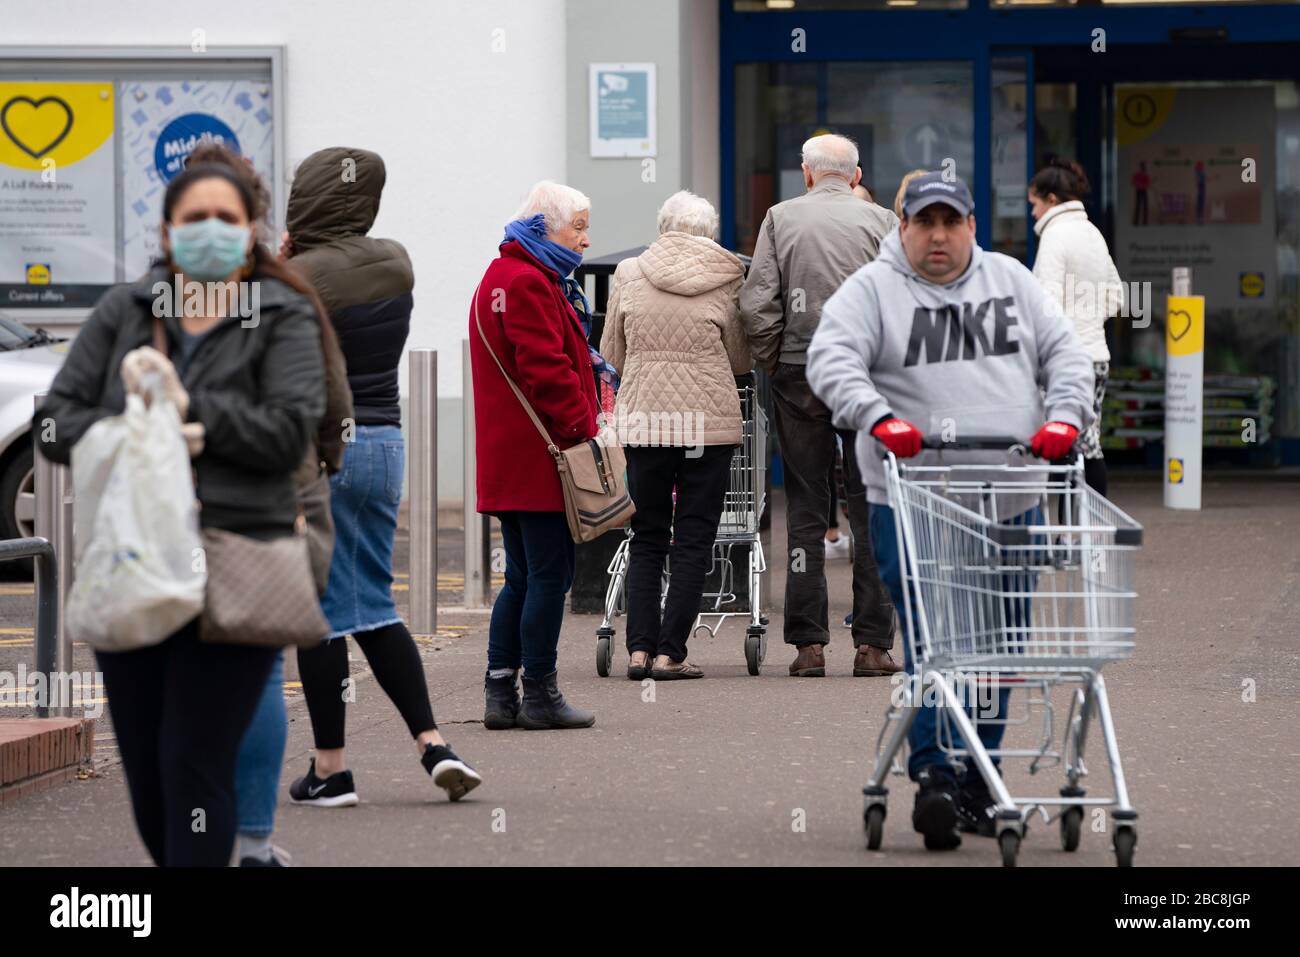 Glasgow, Scotland, UK. 3 April, 2020. Images from the south side of Glasgow at the end of the second week of Coronavirus lockdown. Long queue outside Lidl supermarket in Govanhill.  Iain Masterton/Alamy Live News Stock Photo